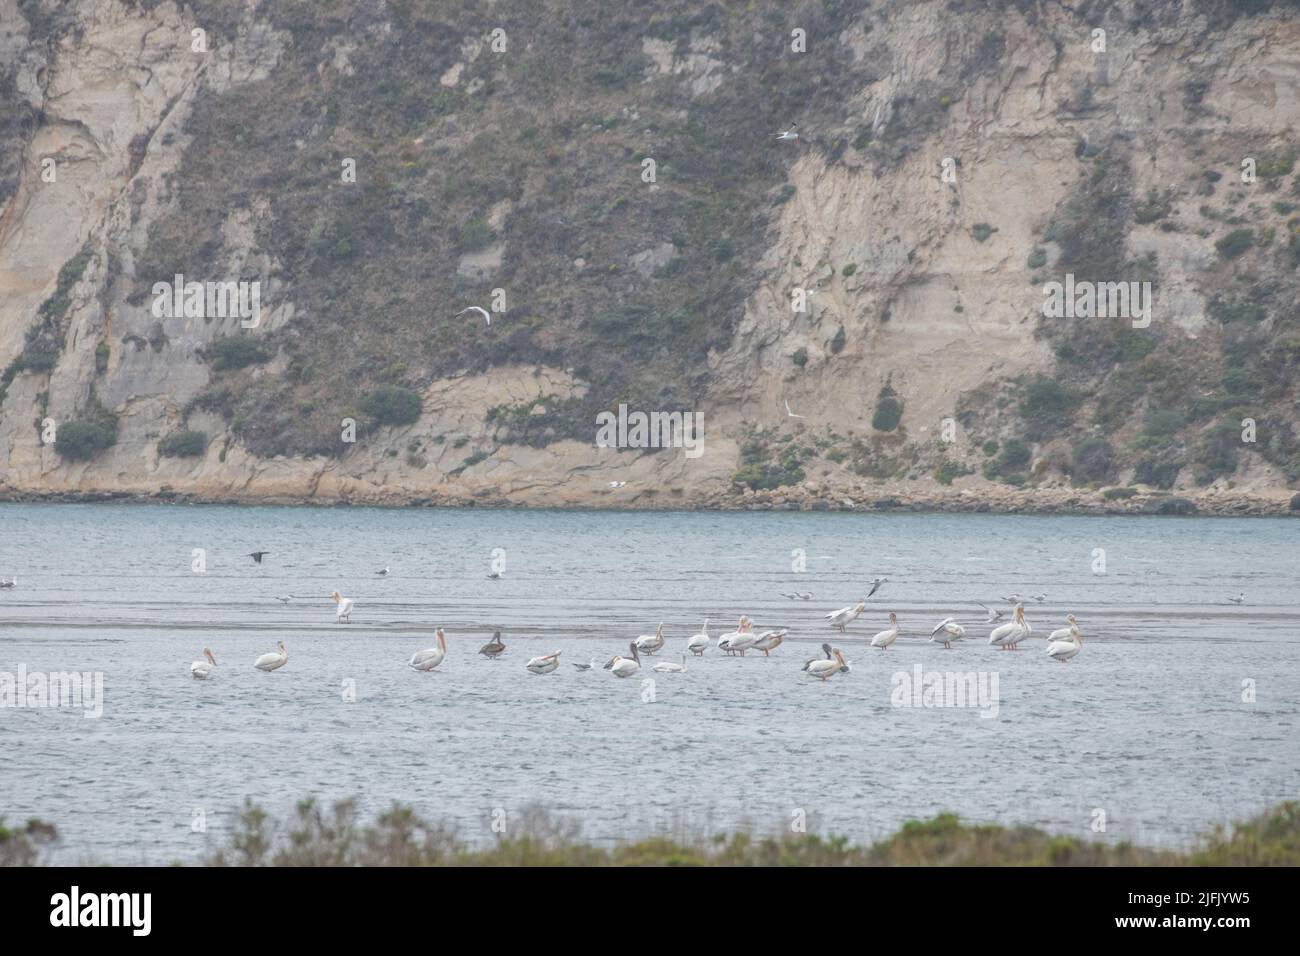 American white pelican (Pelecanus erythrorhynchos) stand in the water in an estuary in Point Reyes National seashore in California. Stock Photo